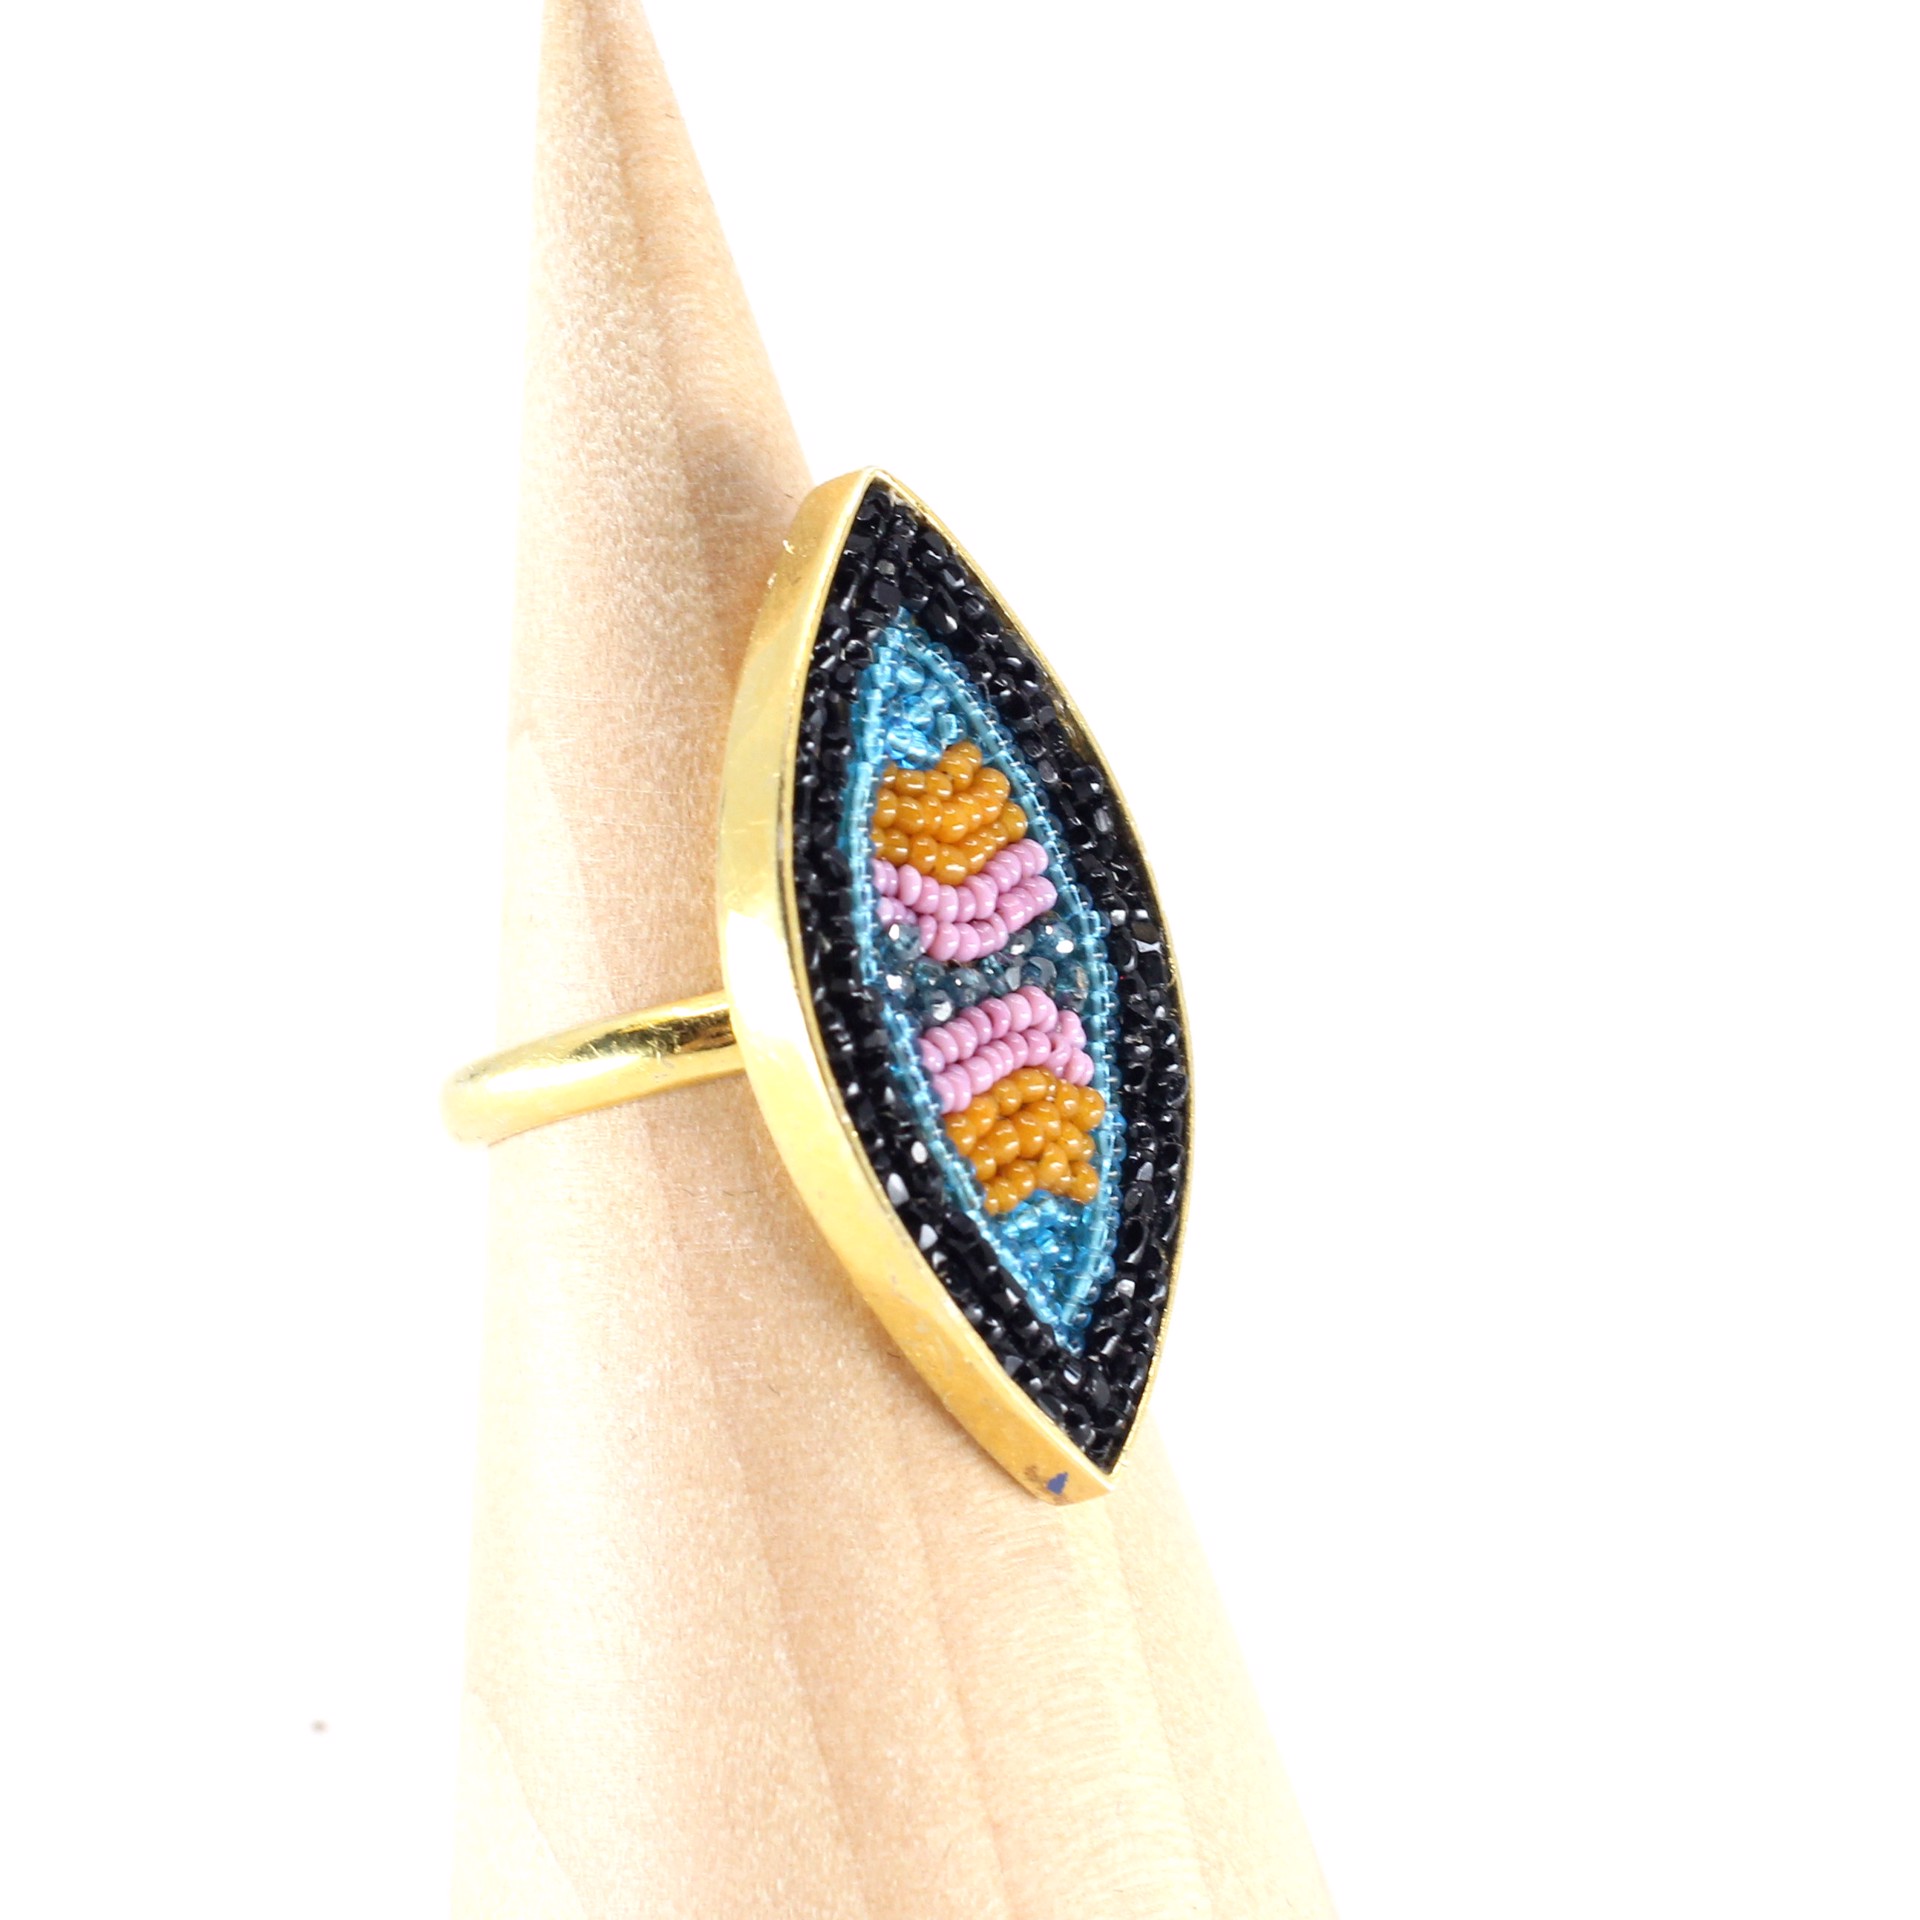 Beaded Ring (Size 6.5) by Hollis Chitto